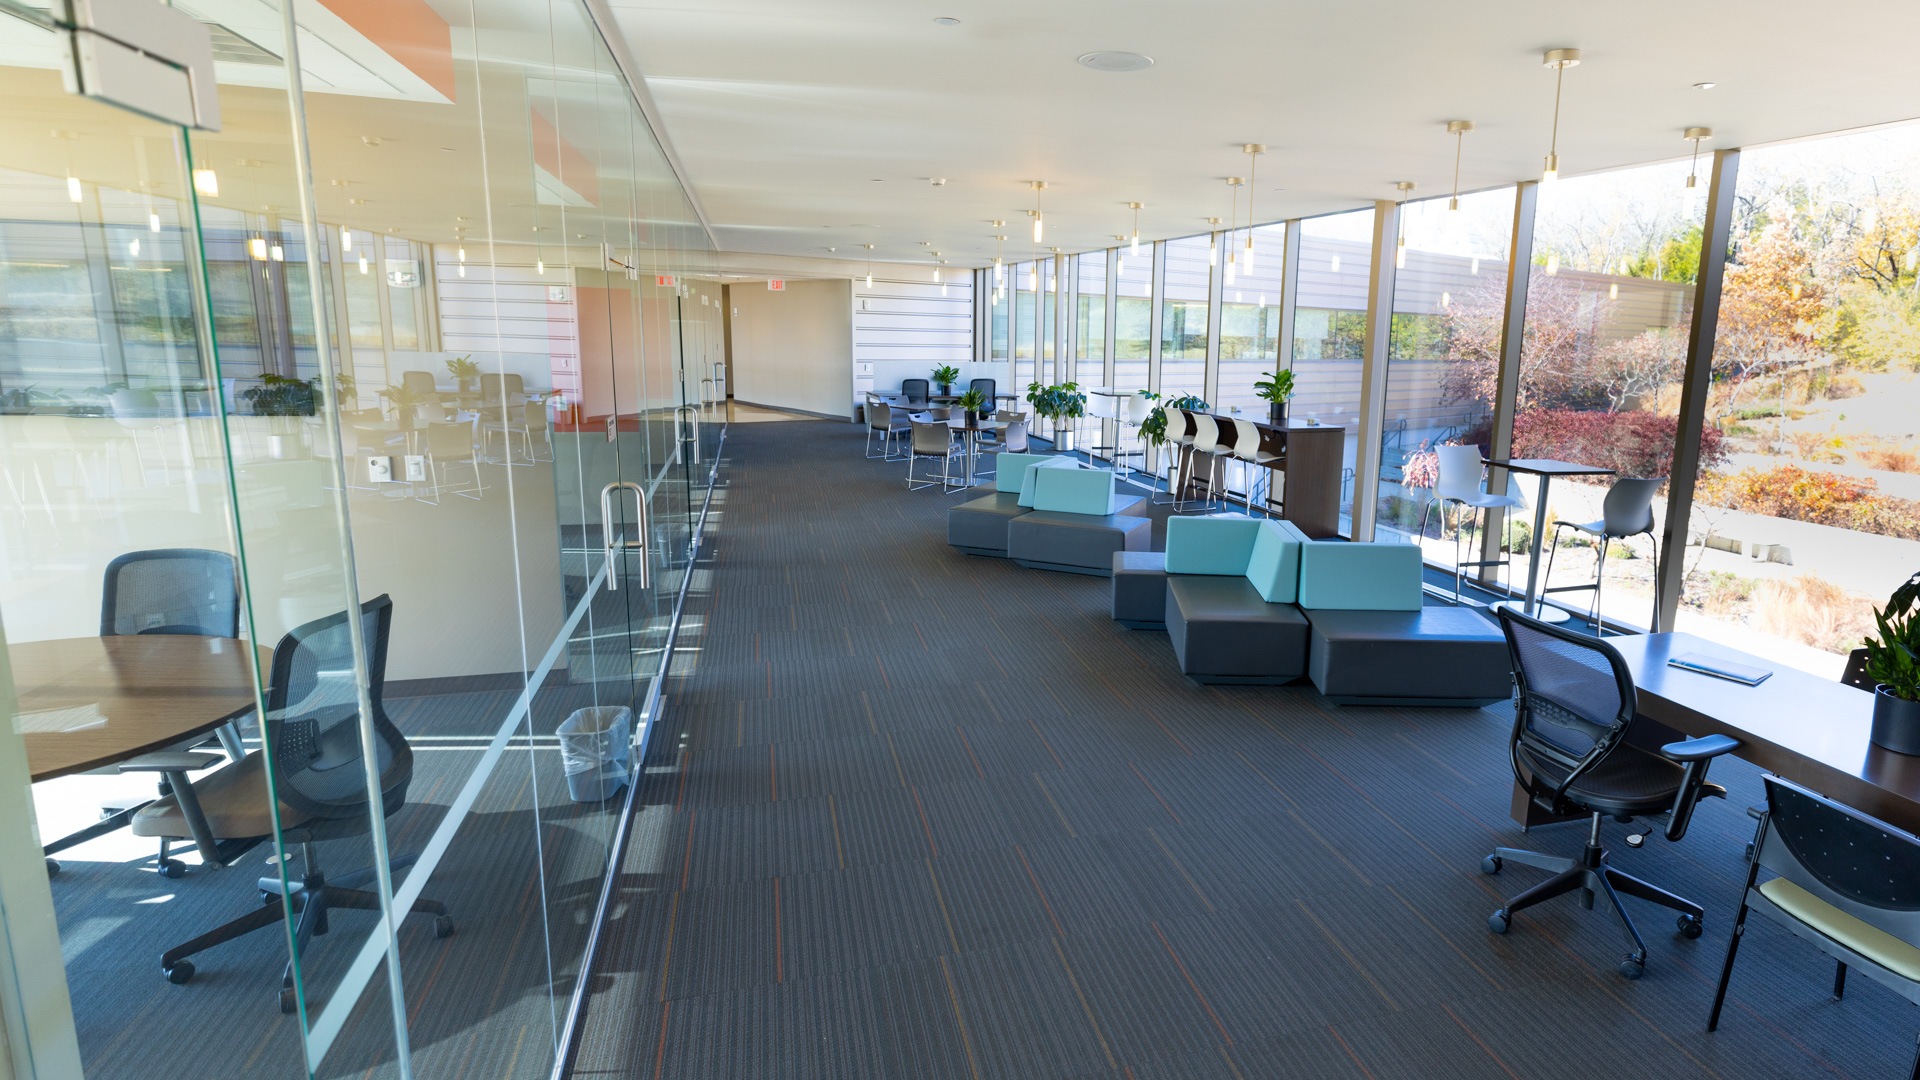 An empty lounge near meeting rooms at the KU Innovation Park in Lawrence.